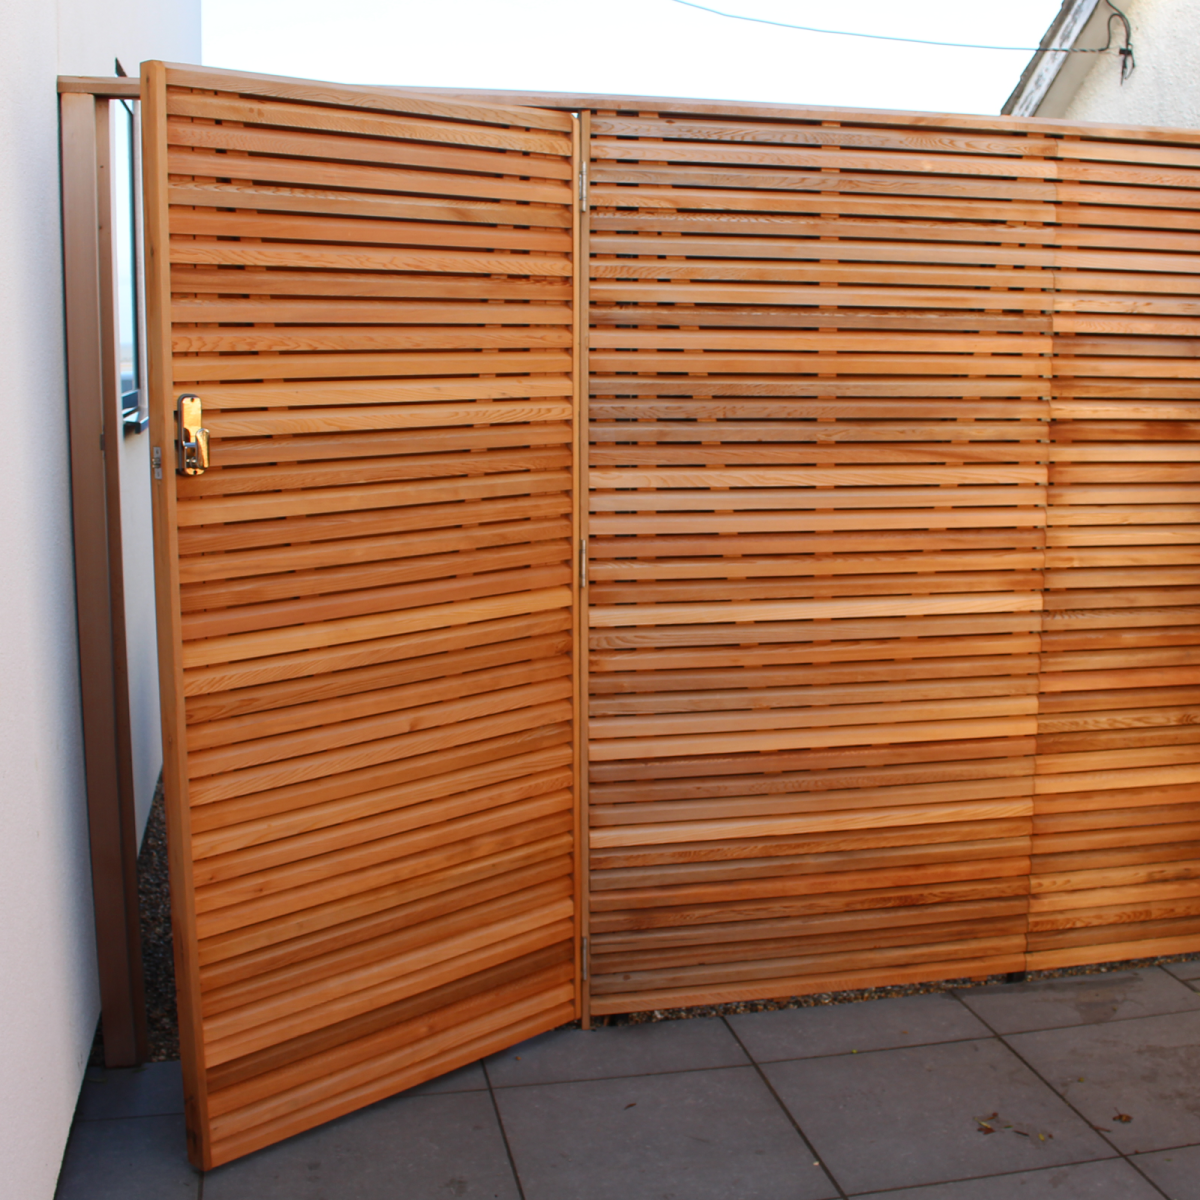 An unlocked Canadian Red Cedar gate matches with the Cedar fence.